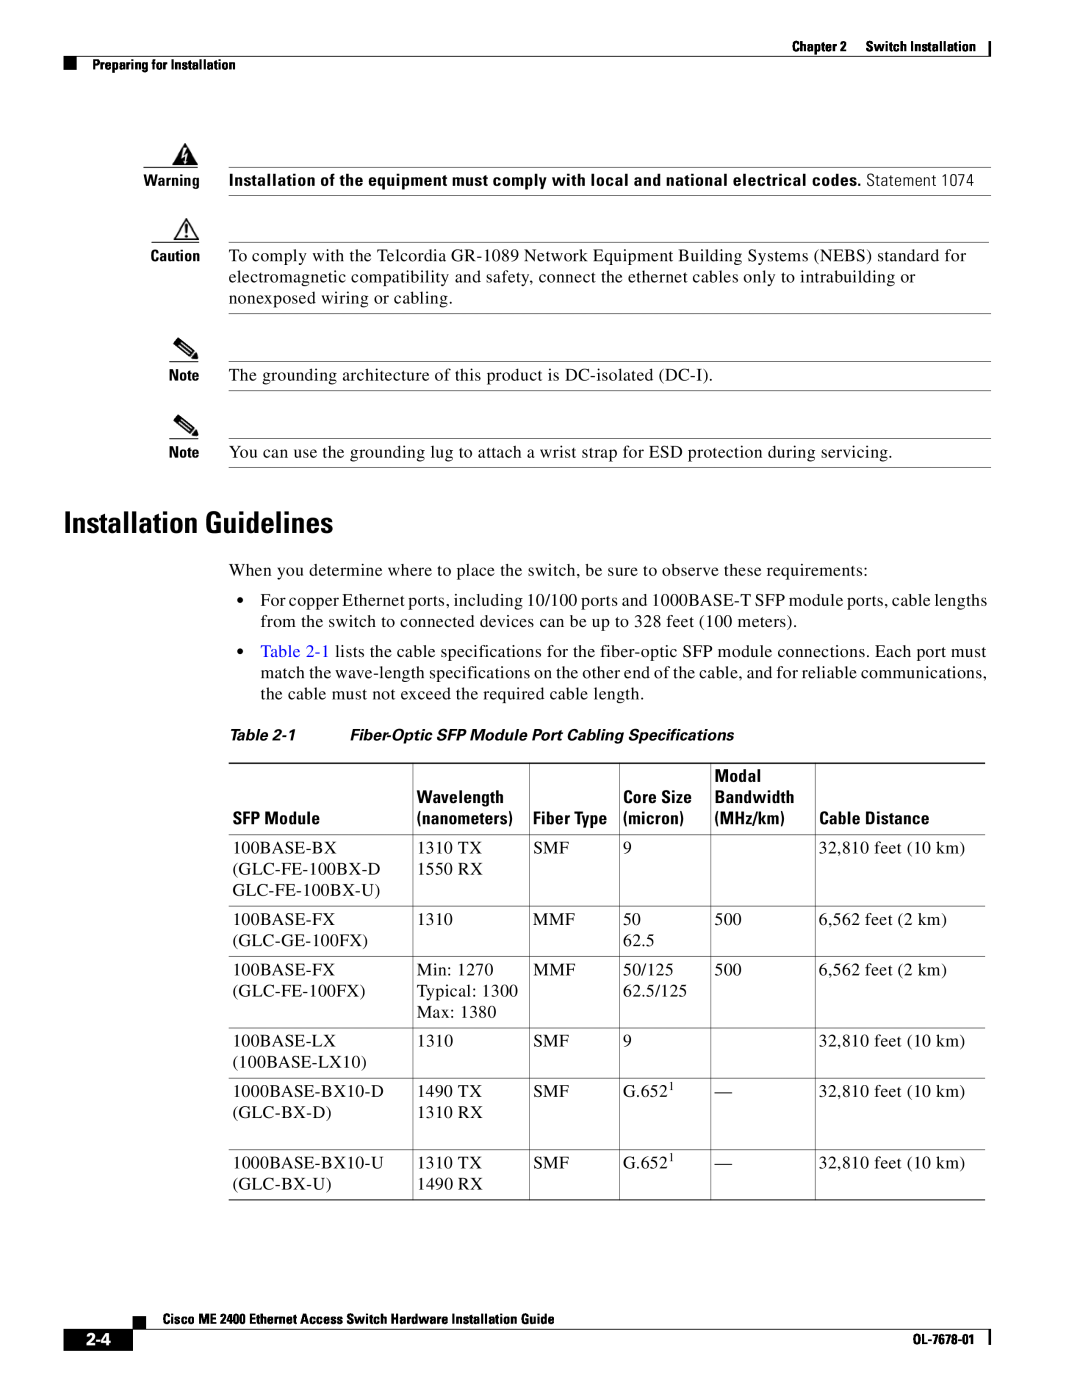 Cisco Systems ME 2400 manual Installation Guidelines 